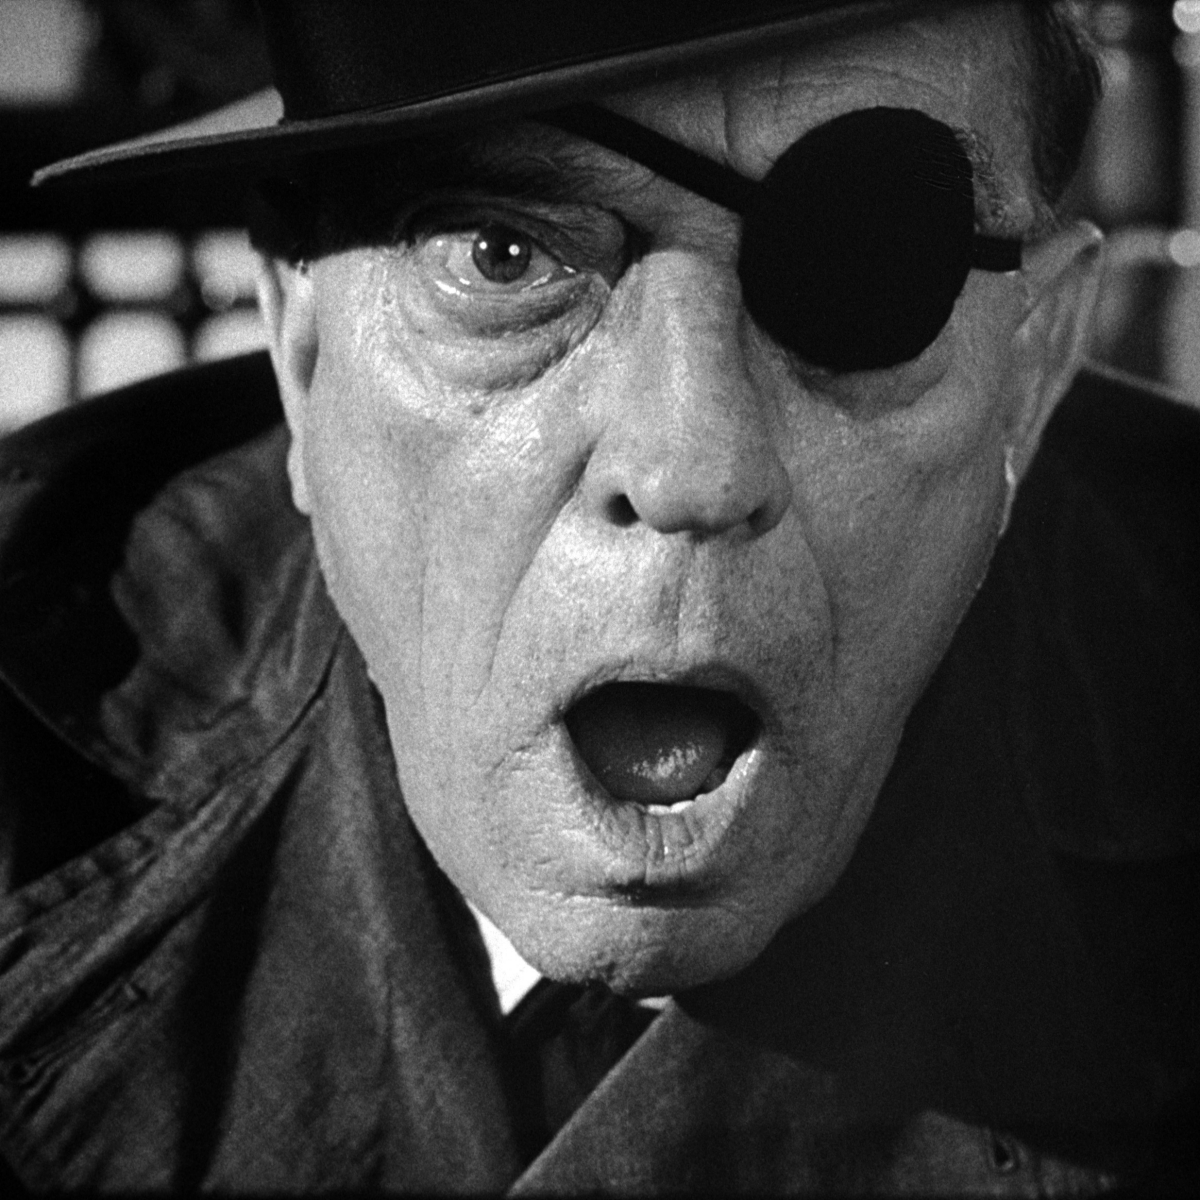 Buster Keaton in 'FILM' (1965), conceived and written by Samuel Beckett